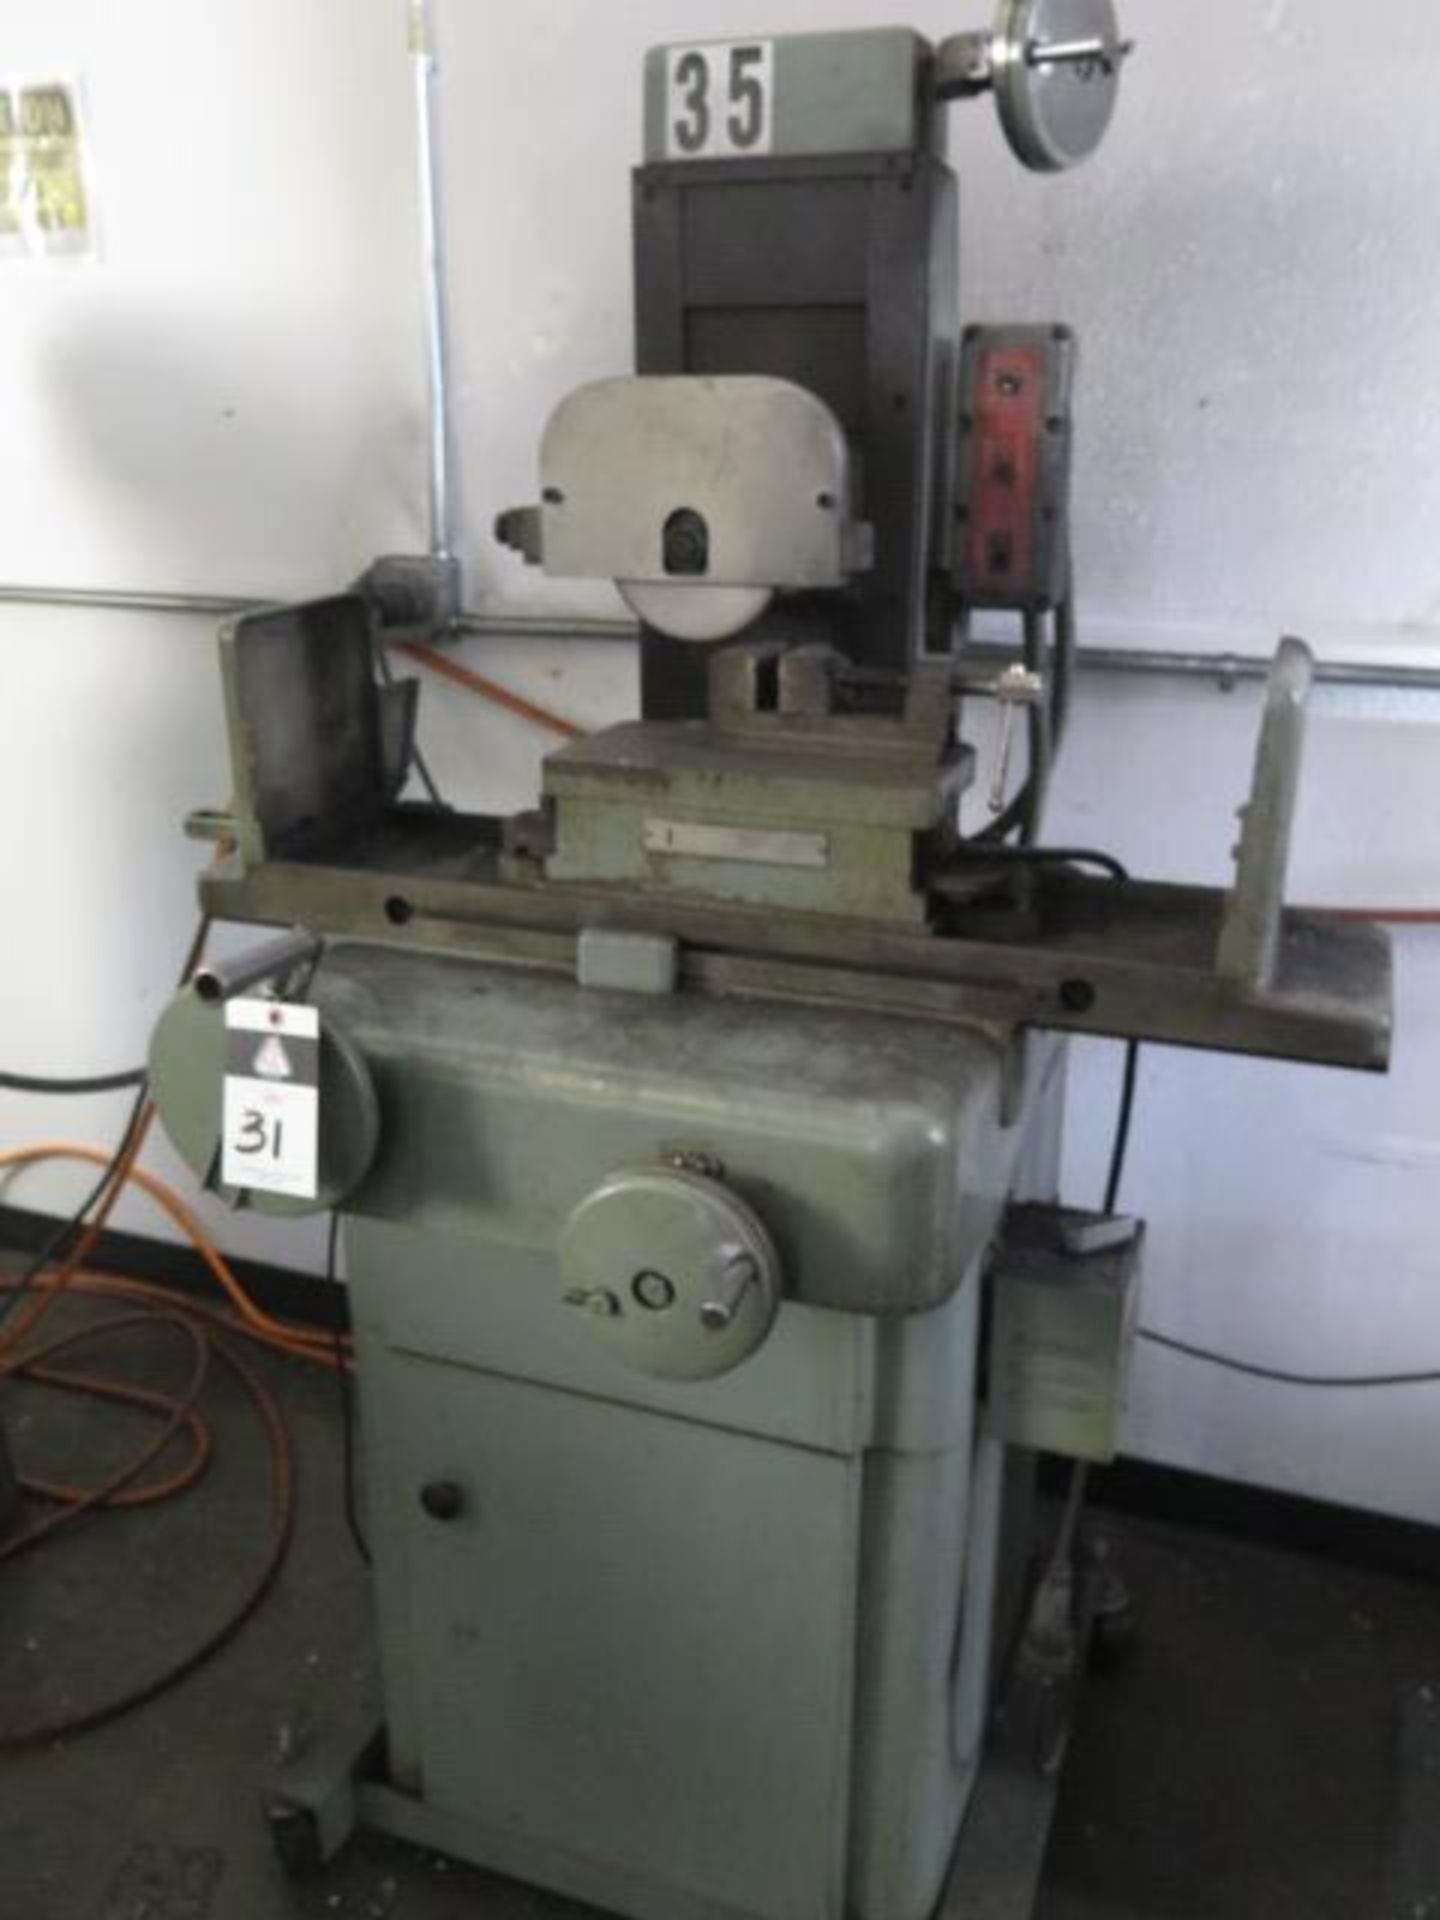 6” x 12” Surface Grinder e/ Magnalock Electromagnetic Chuck (SOLD AS-IS - NO WARRANTY) - Image 2 of 7